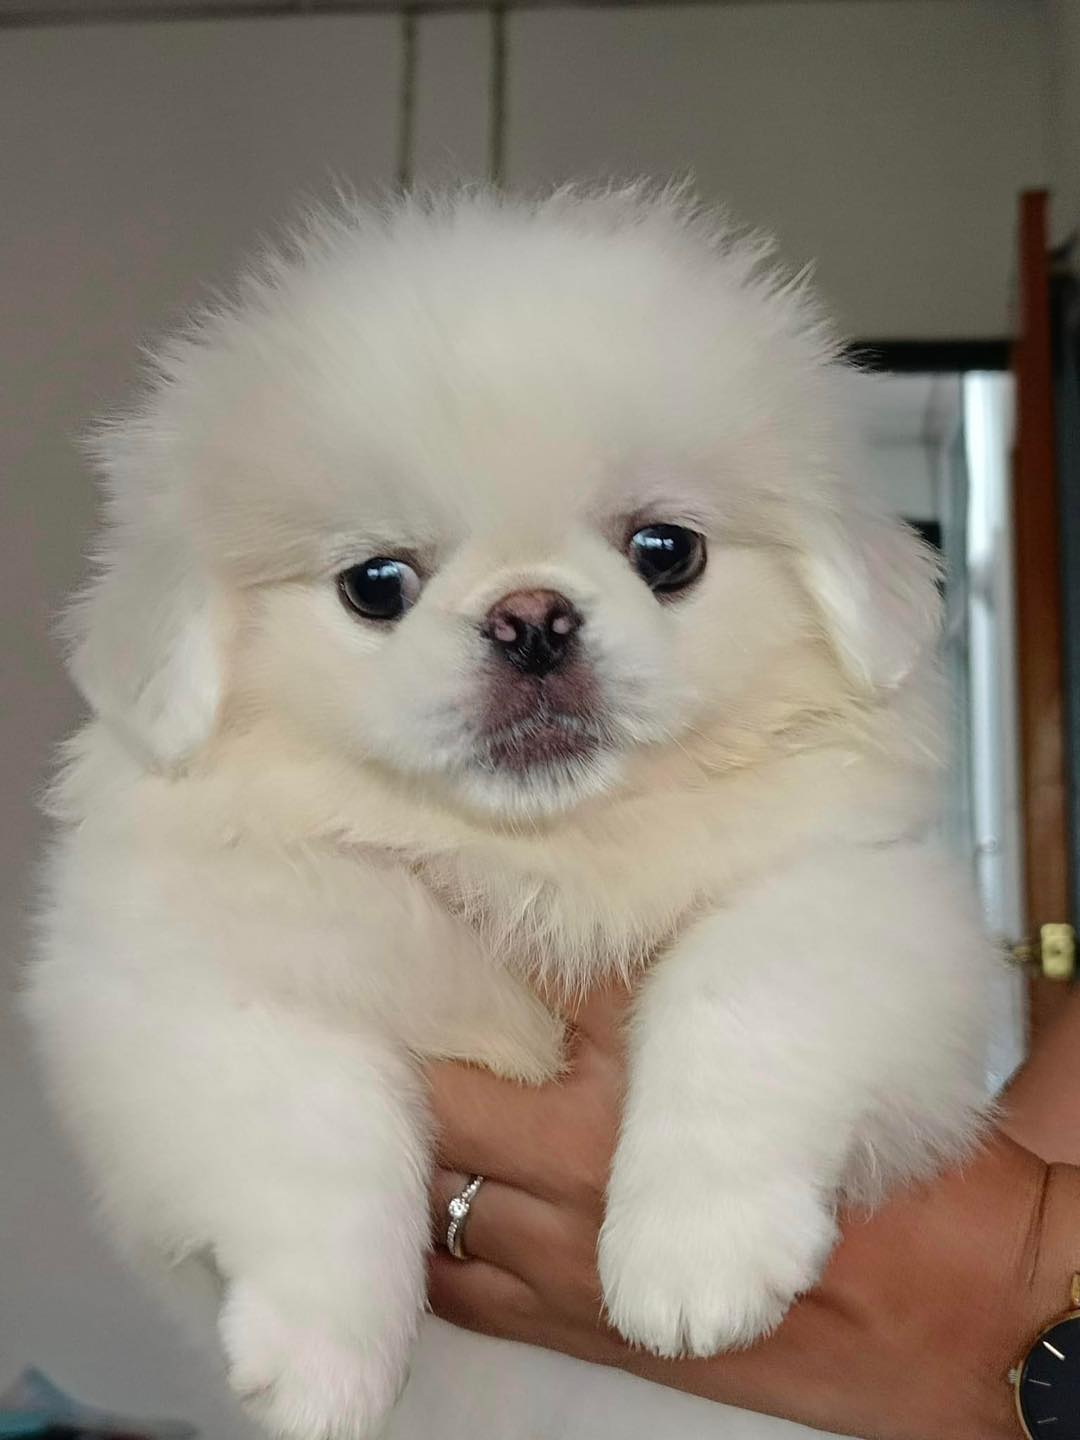 Adorable purebred Pekingese Puppies Available